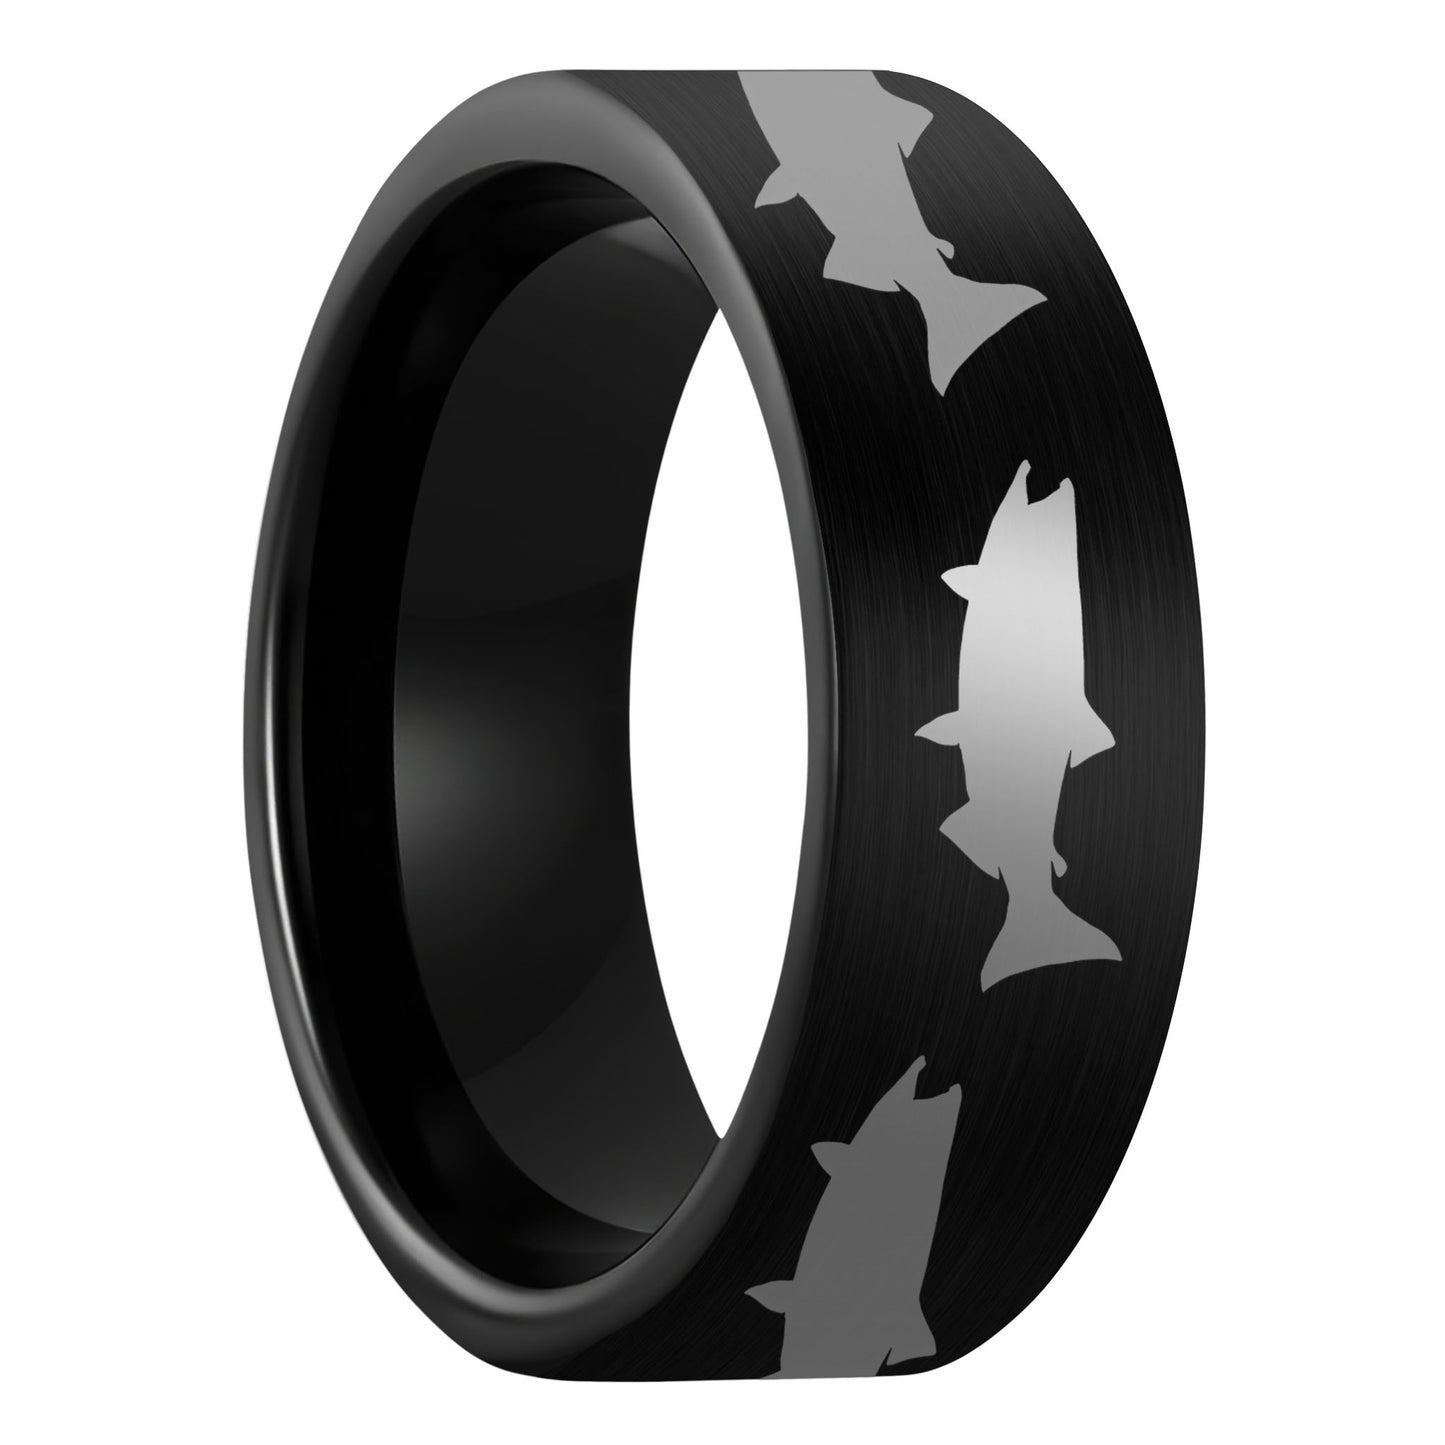 A salmon fish brushed black tungsten men's wedding band displayed on a plain white background.